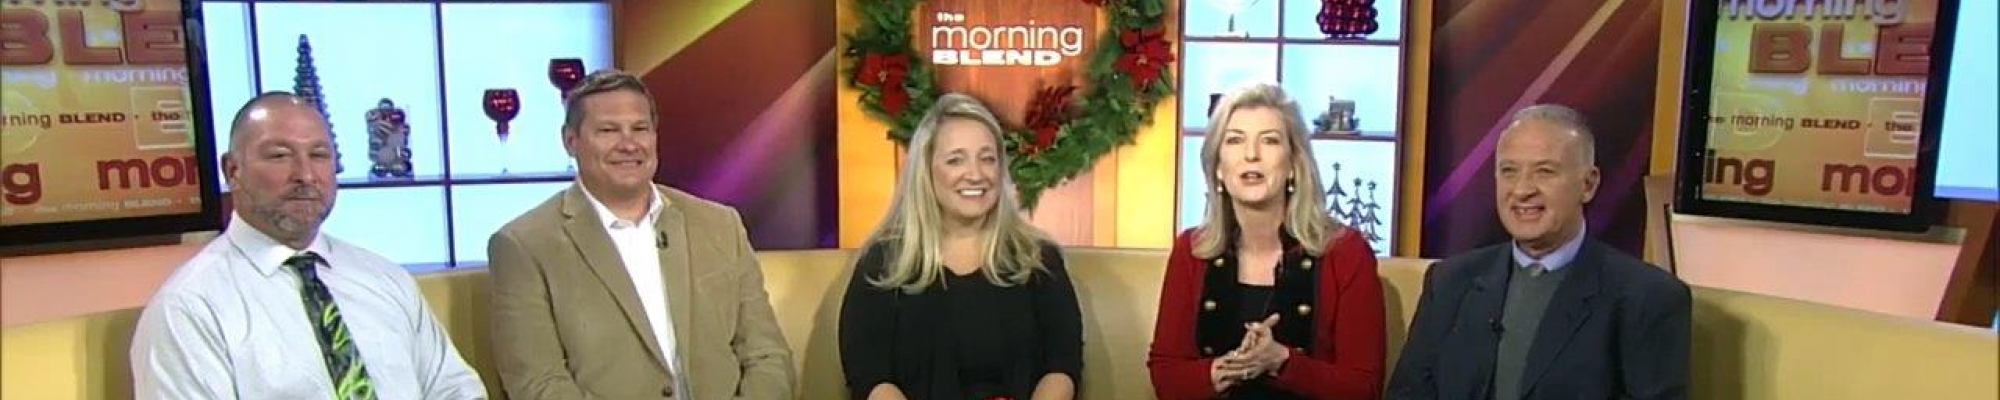 CEO Kristin Brandner with school principals on The Morning Blend